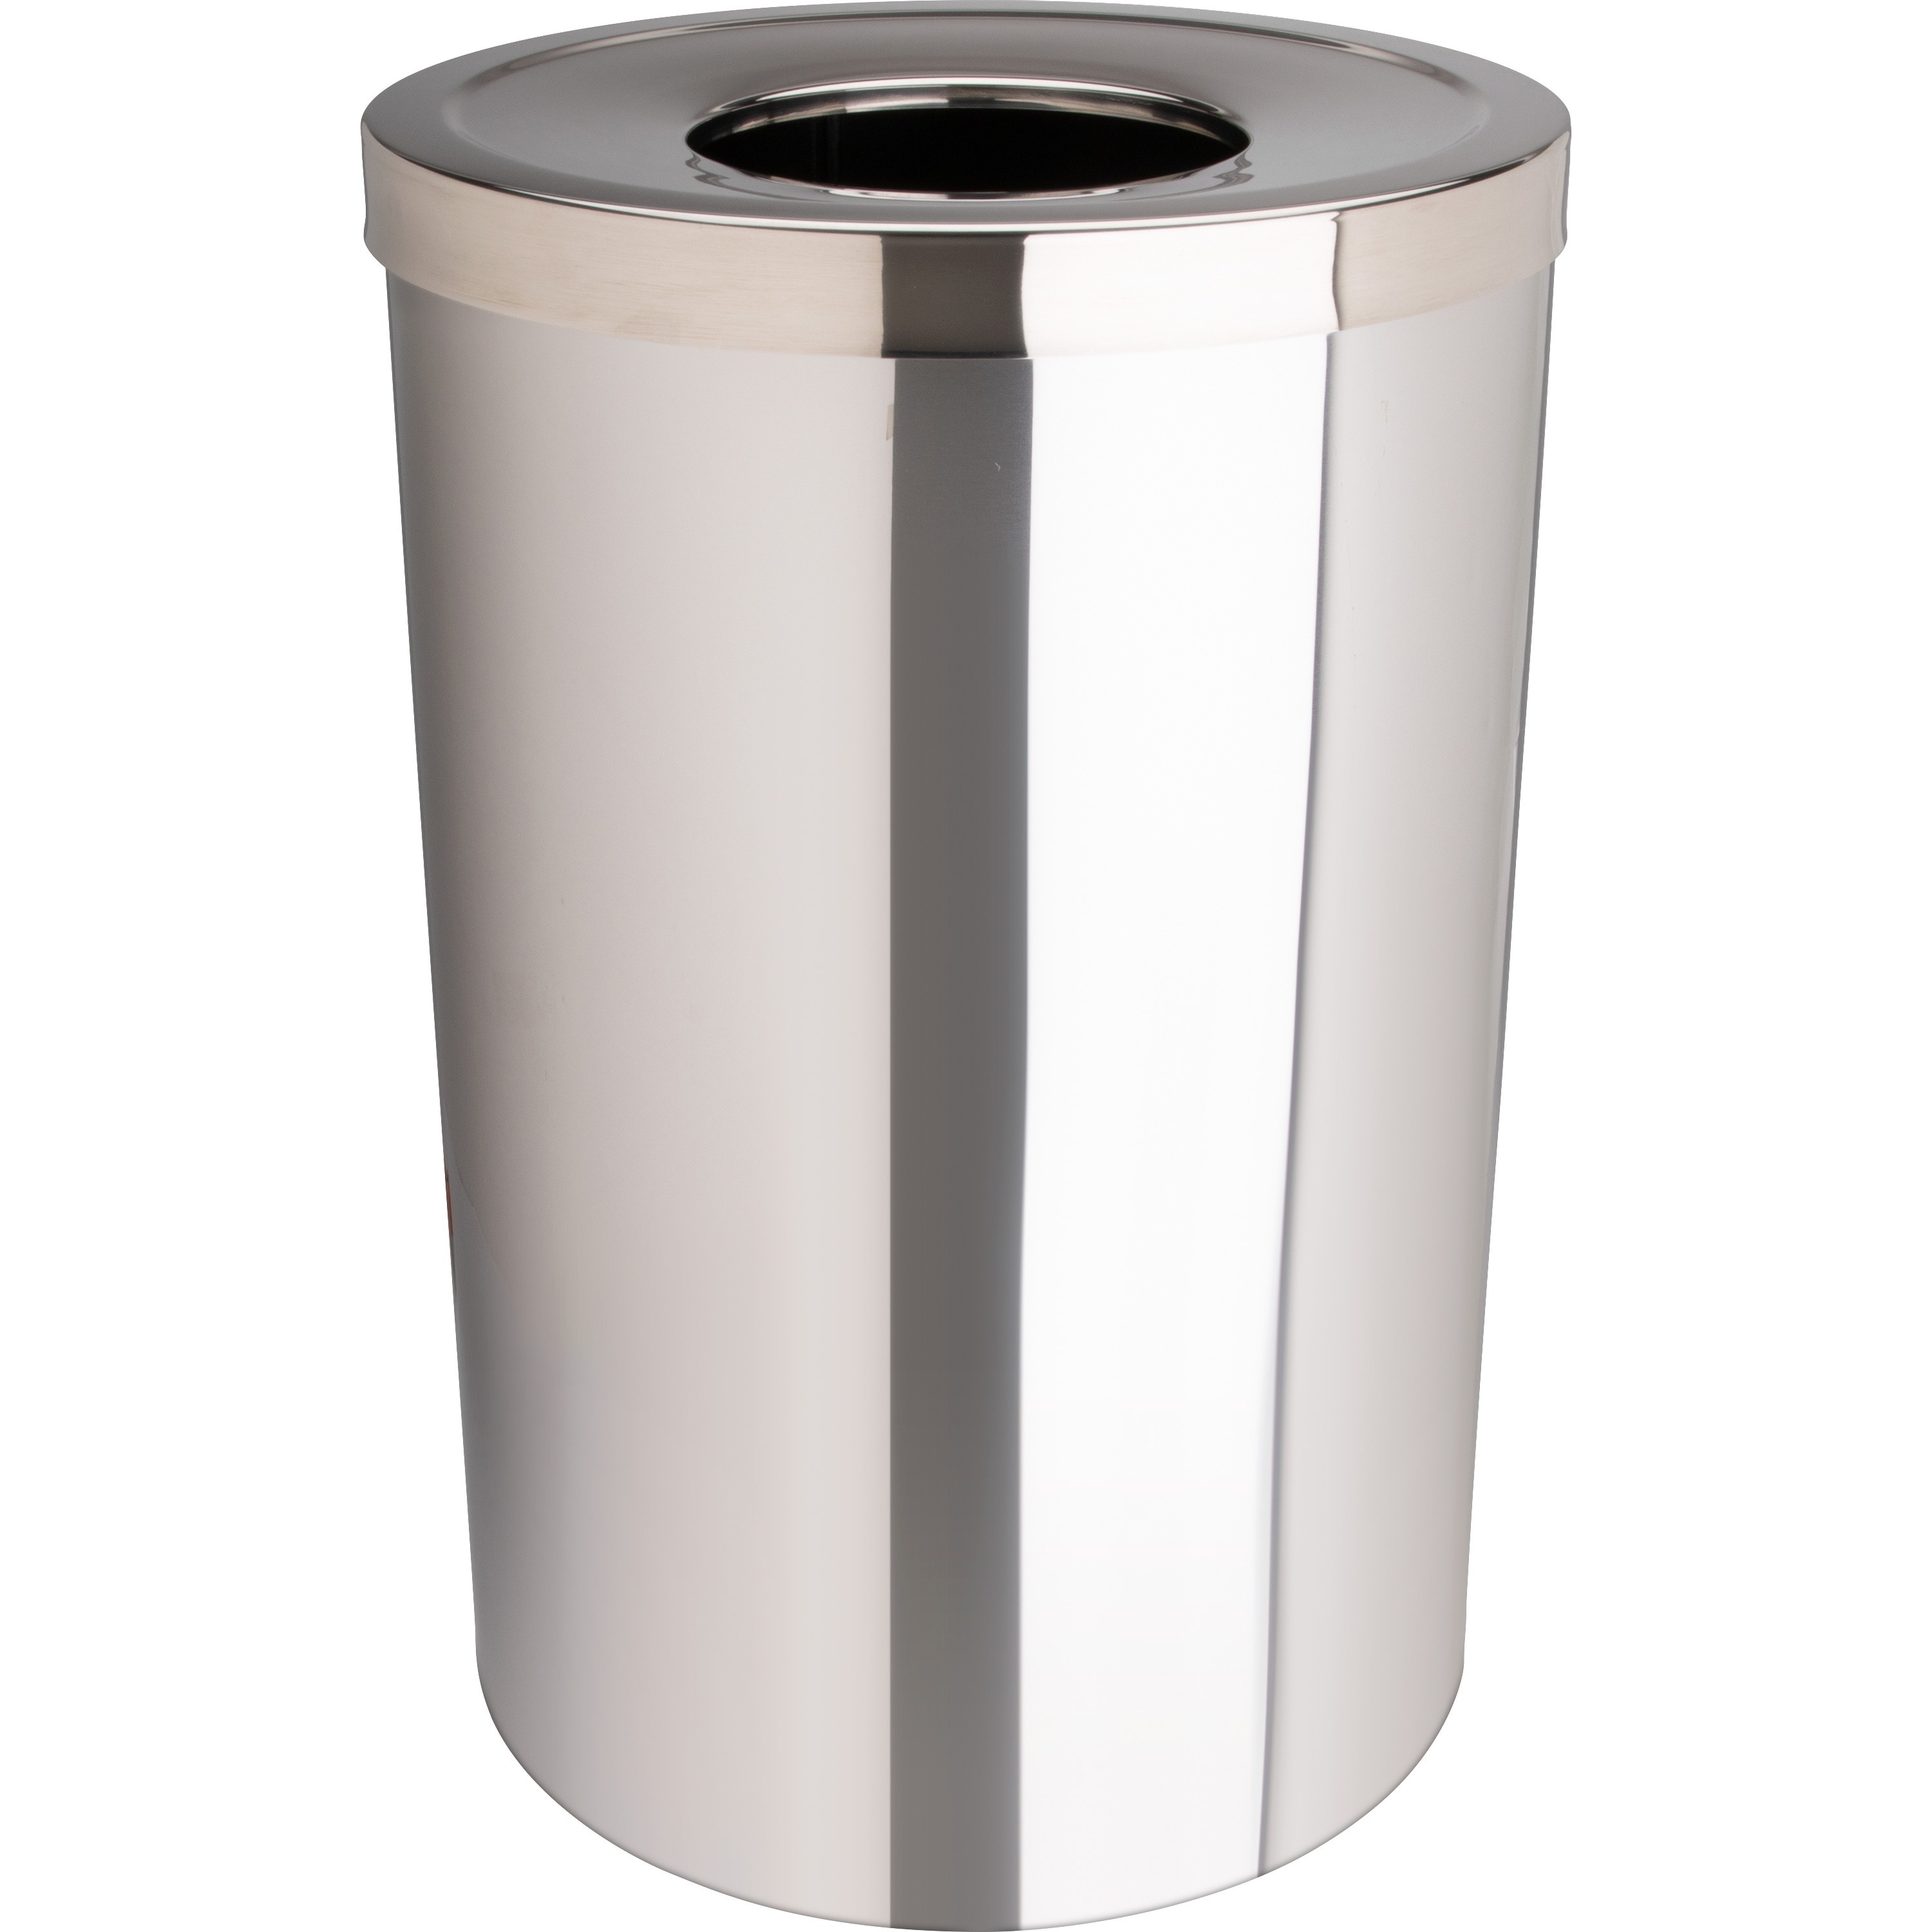 Commercial Grade Stainless Steel Renewed Silver, iTouchless 18 Gallon Dual-Deodorizer Open Top Trash Can Rectangular Shape 68 Liter Recycle Bin